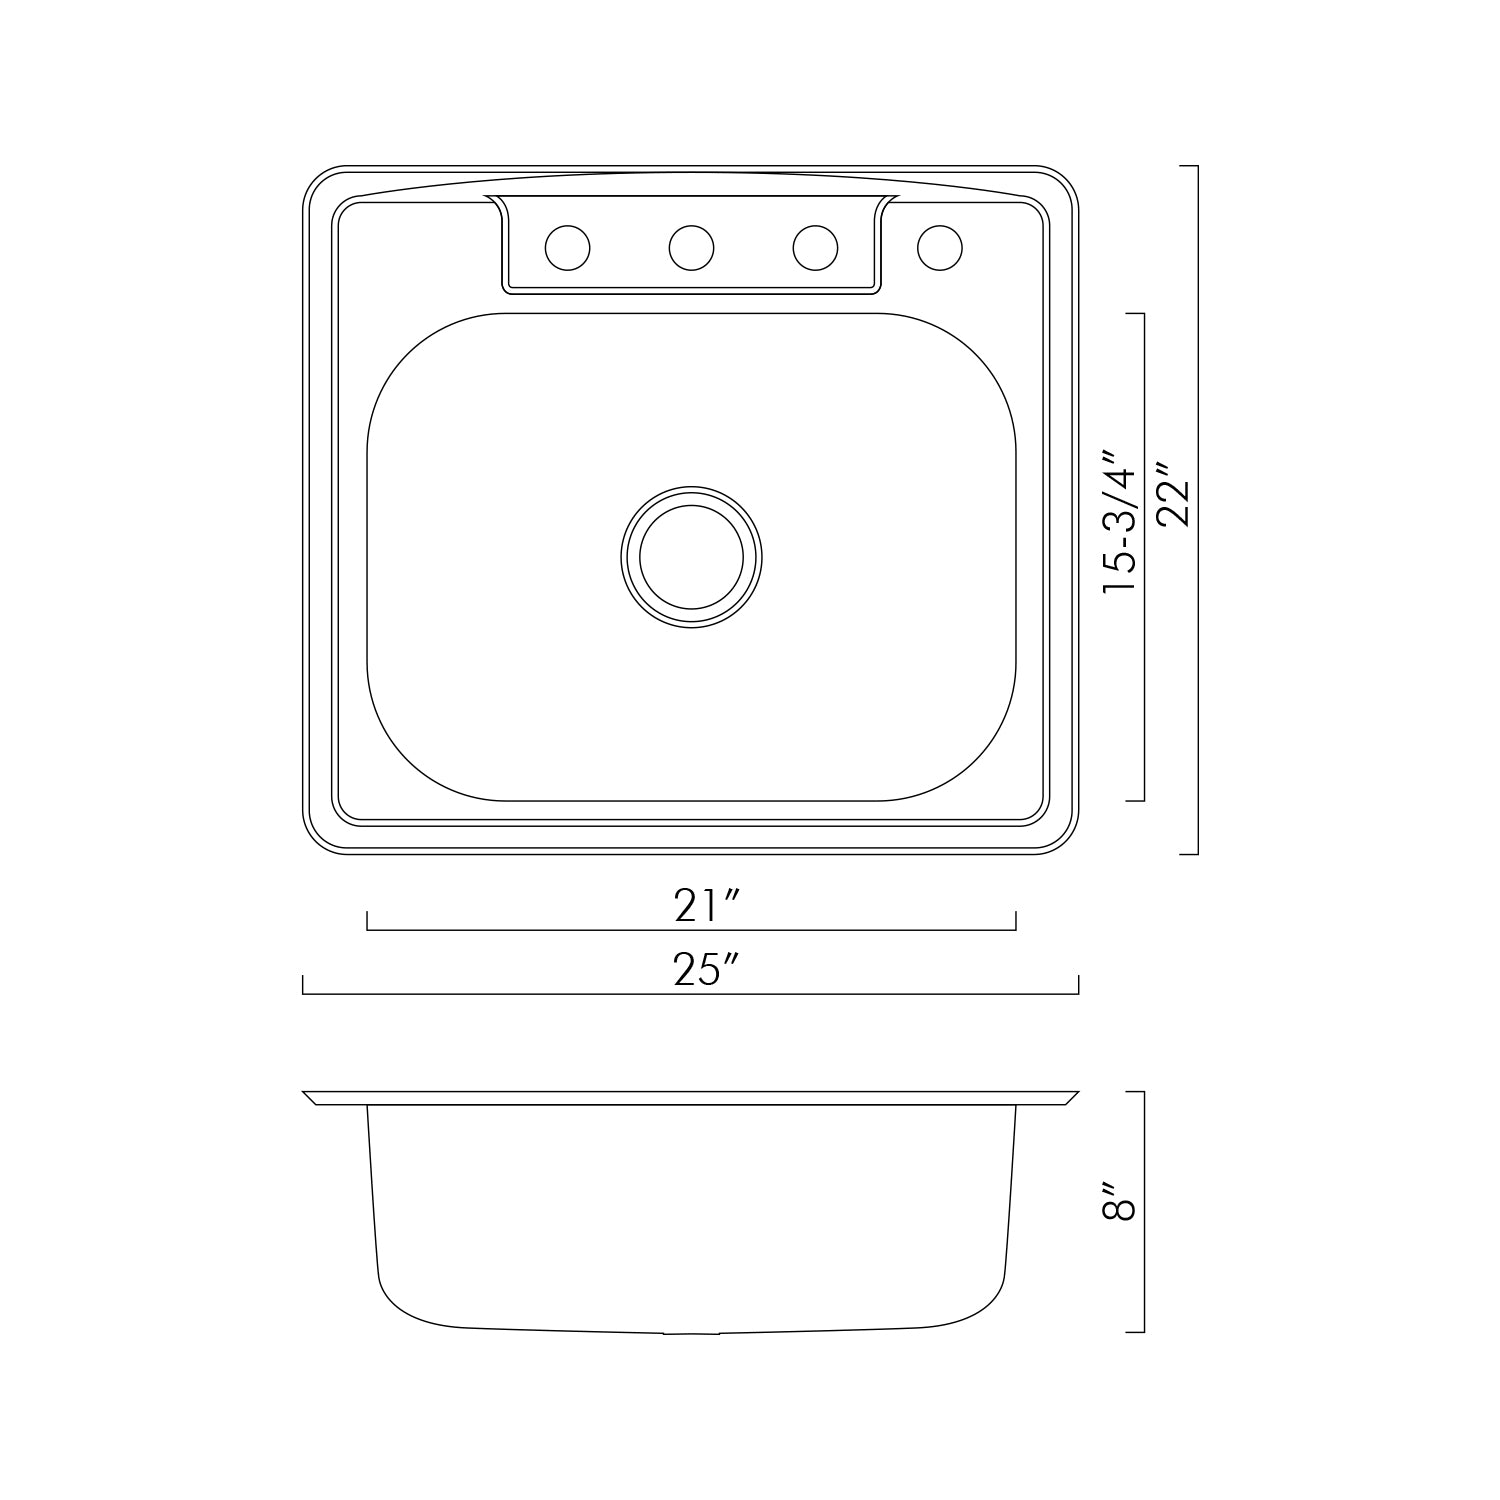 DAX  Single Bowl Top Mount Kitchen Sink, 20 Gauge Stainless Steel, Brushed Finish , 25 x 22 x 8 Inches (DAX-OM-2522)